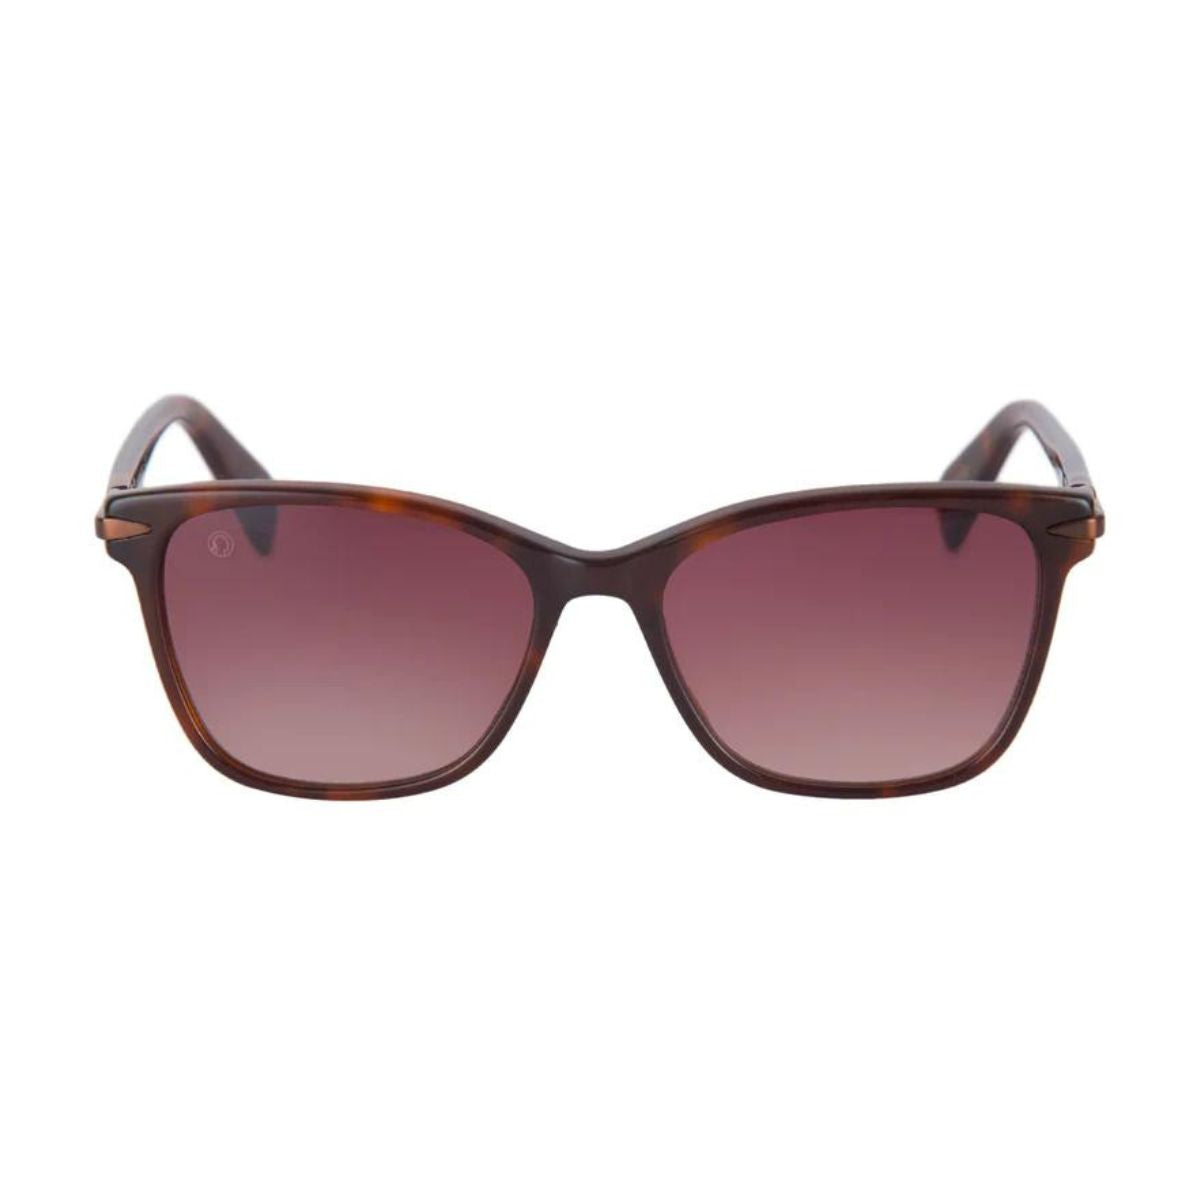 "The Monk Florence N C2 UV Protected Sunglass For Women's At Optorium"